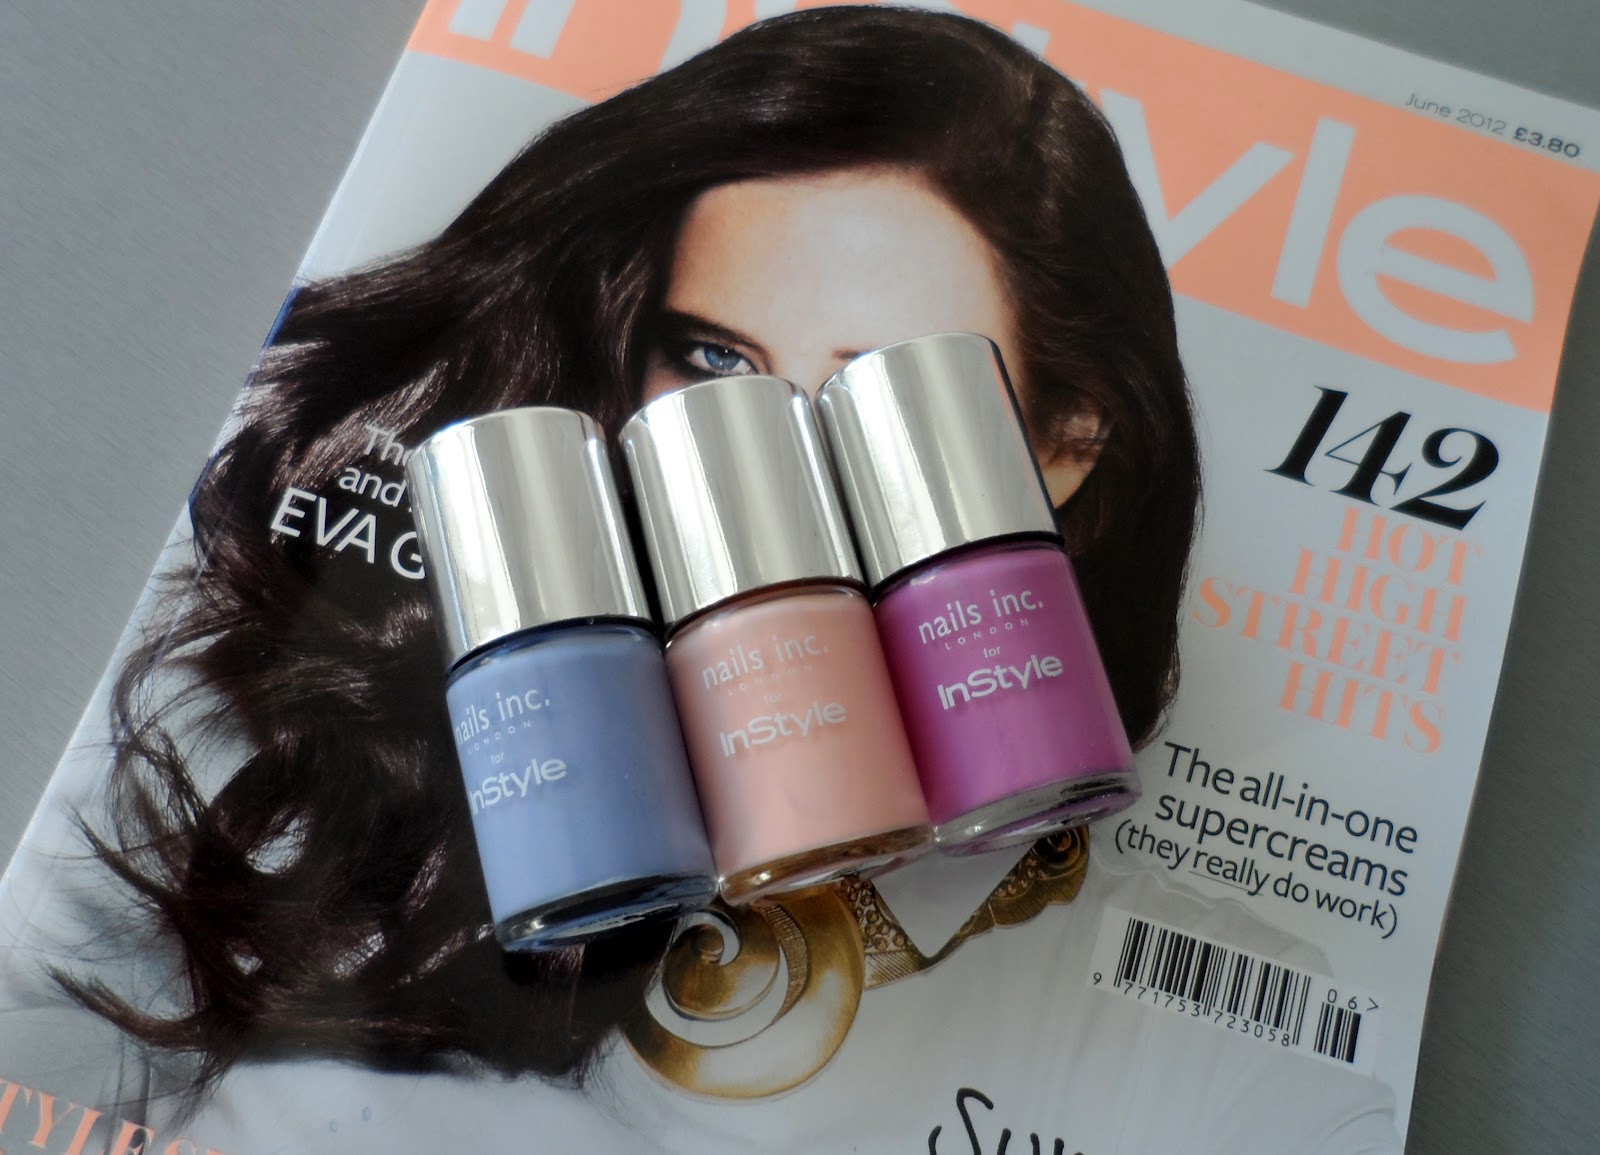 Nails Inc free polish Instyle Magazine offer 2012 - Bluebell, Peach Sorbet